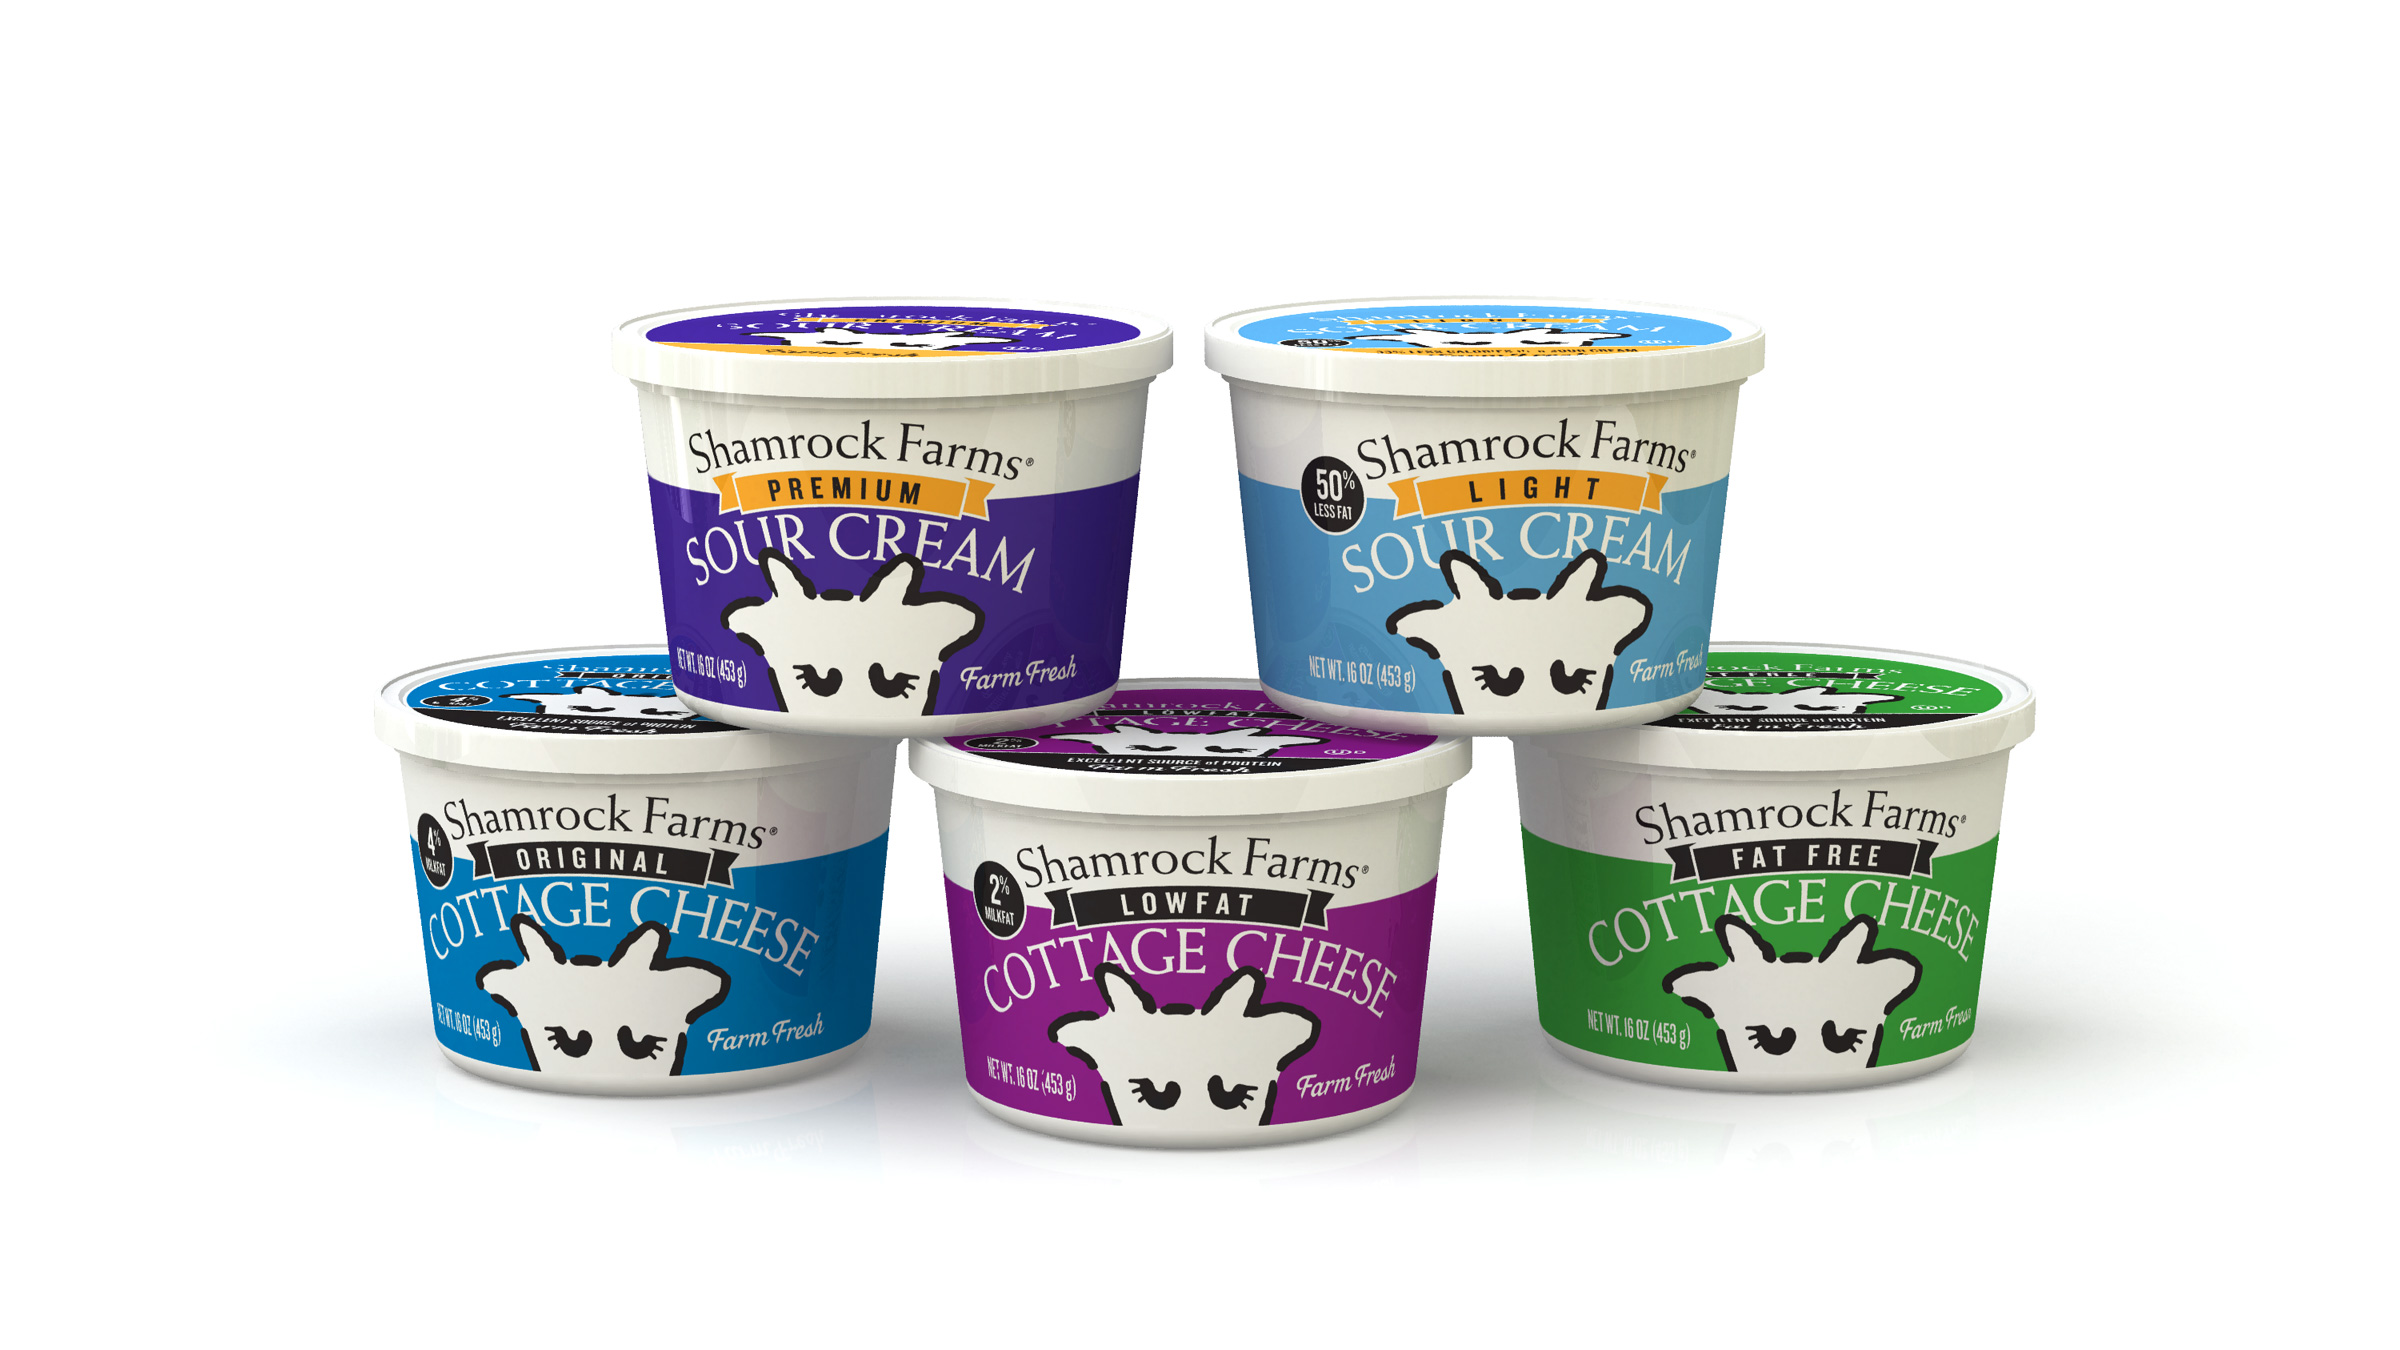 Shamrock Farms Sour Cream & Cottage Cheese